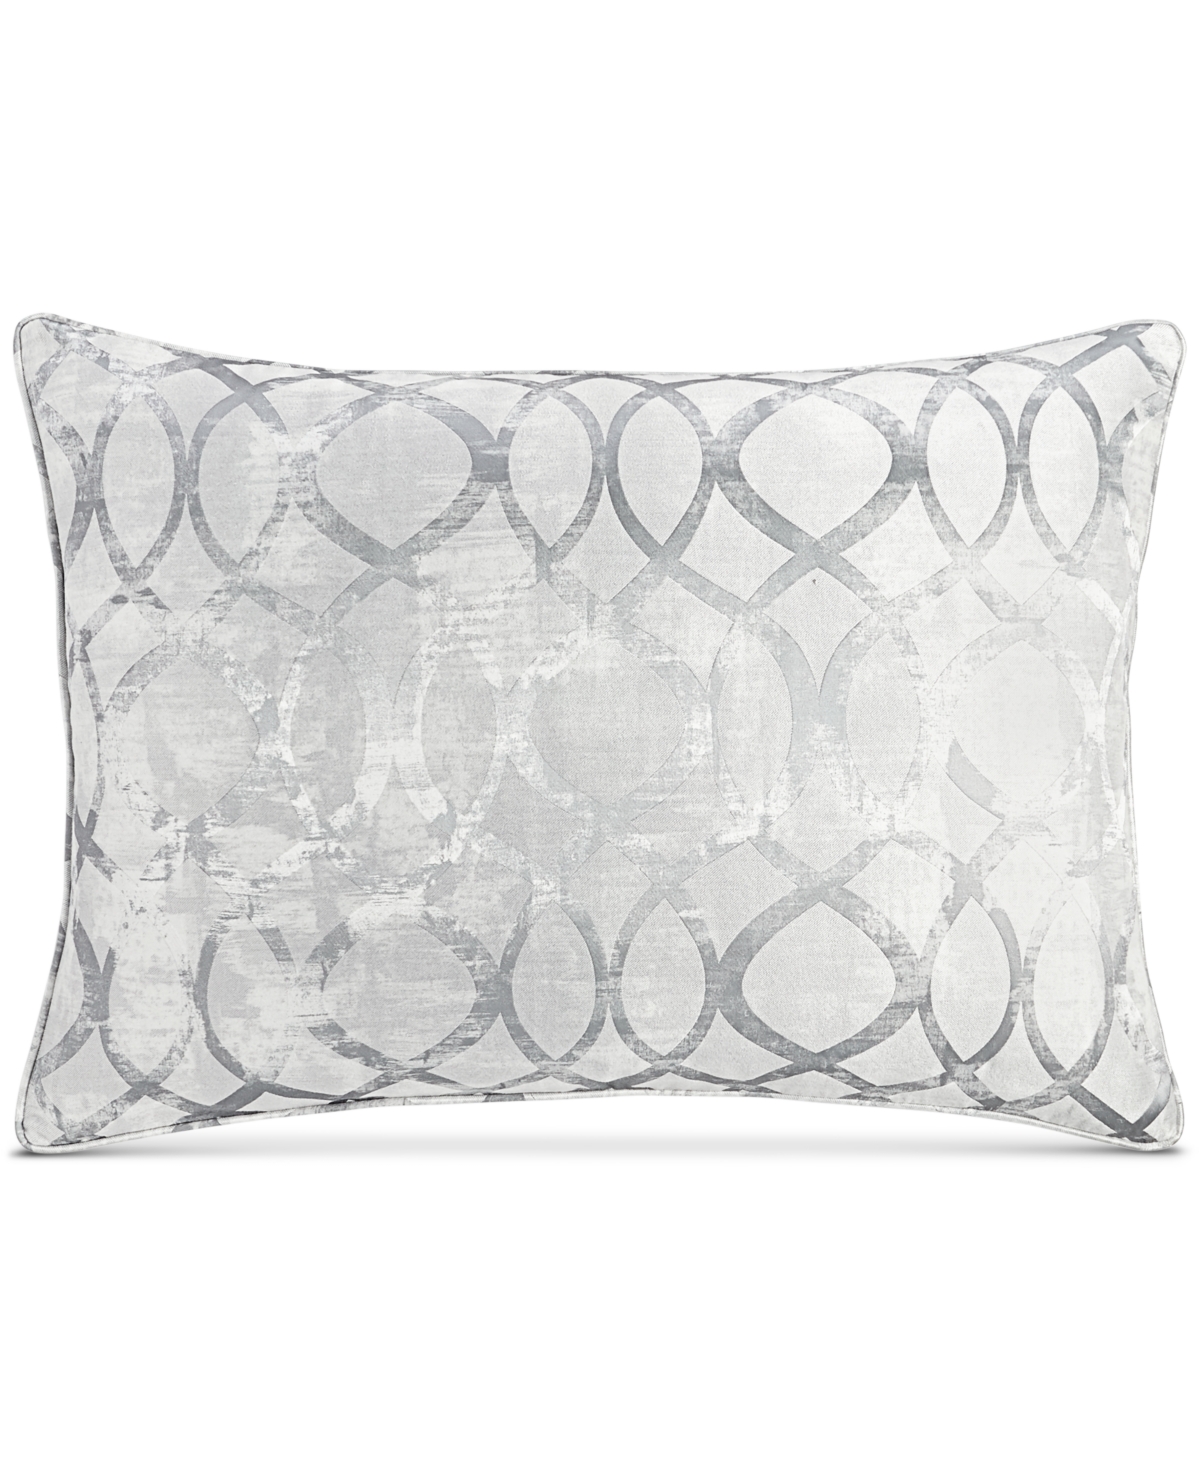 Closeout! Hotel Collection Helix Sham, King, Created for Macy's - Slate